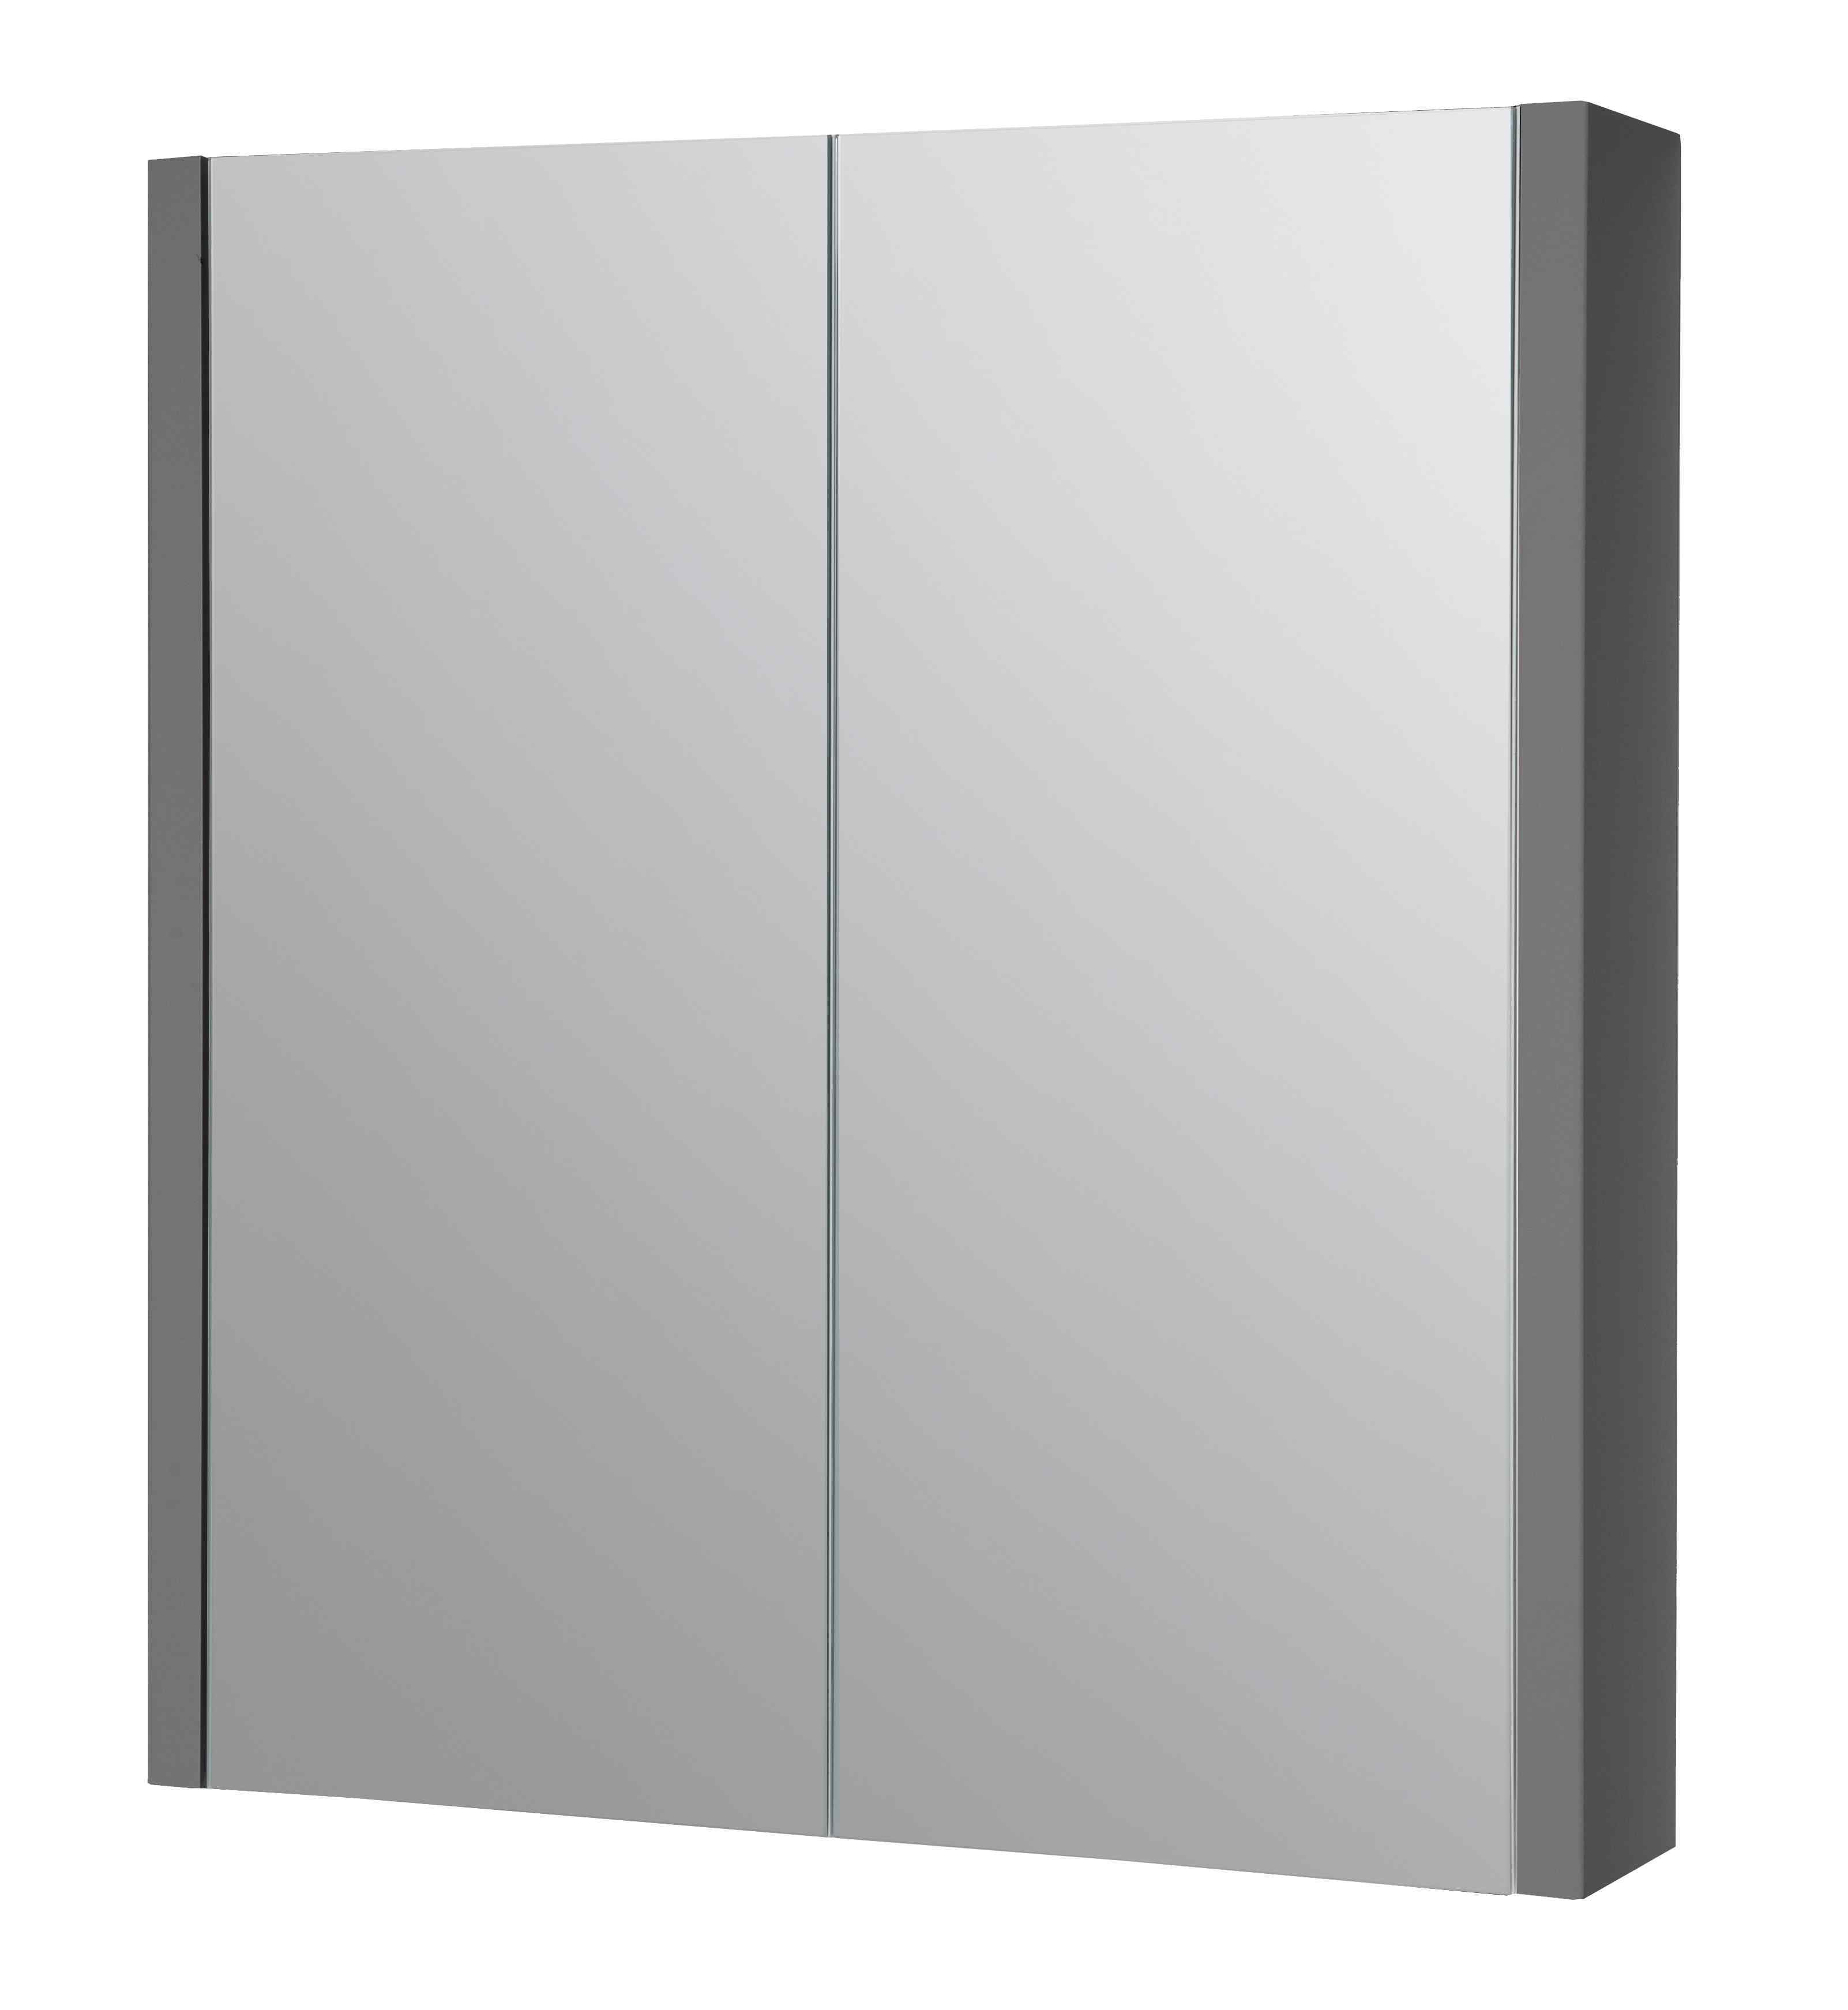 Purity Storm Gray Gloss Bathroom Suit: 1000mm/1100mm Vanity Unit with Basin & Toilet